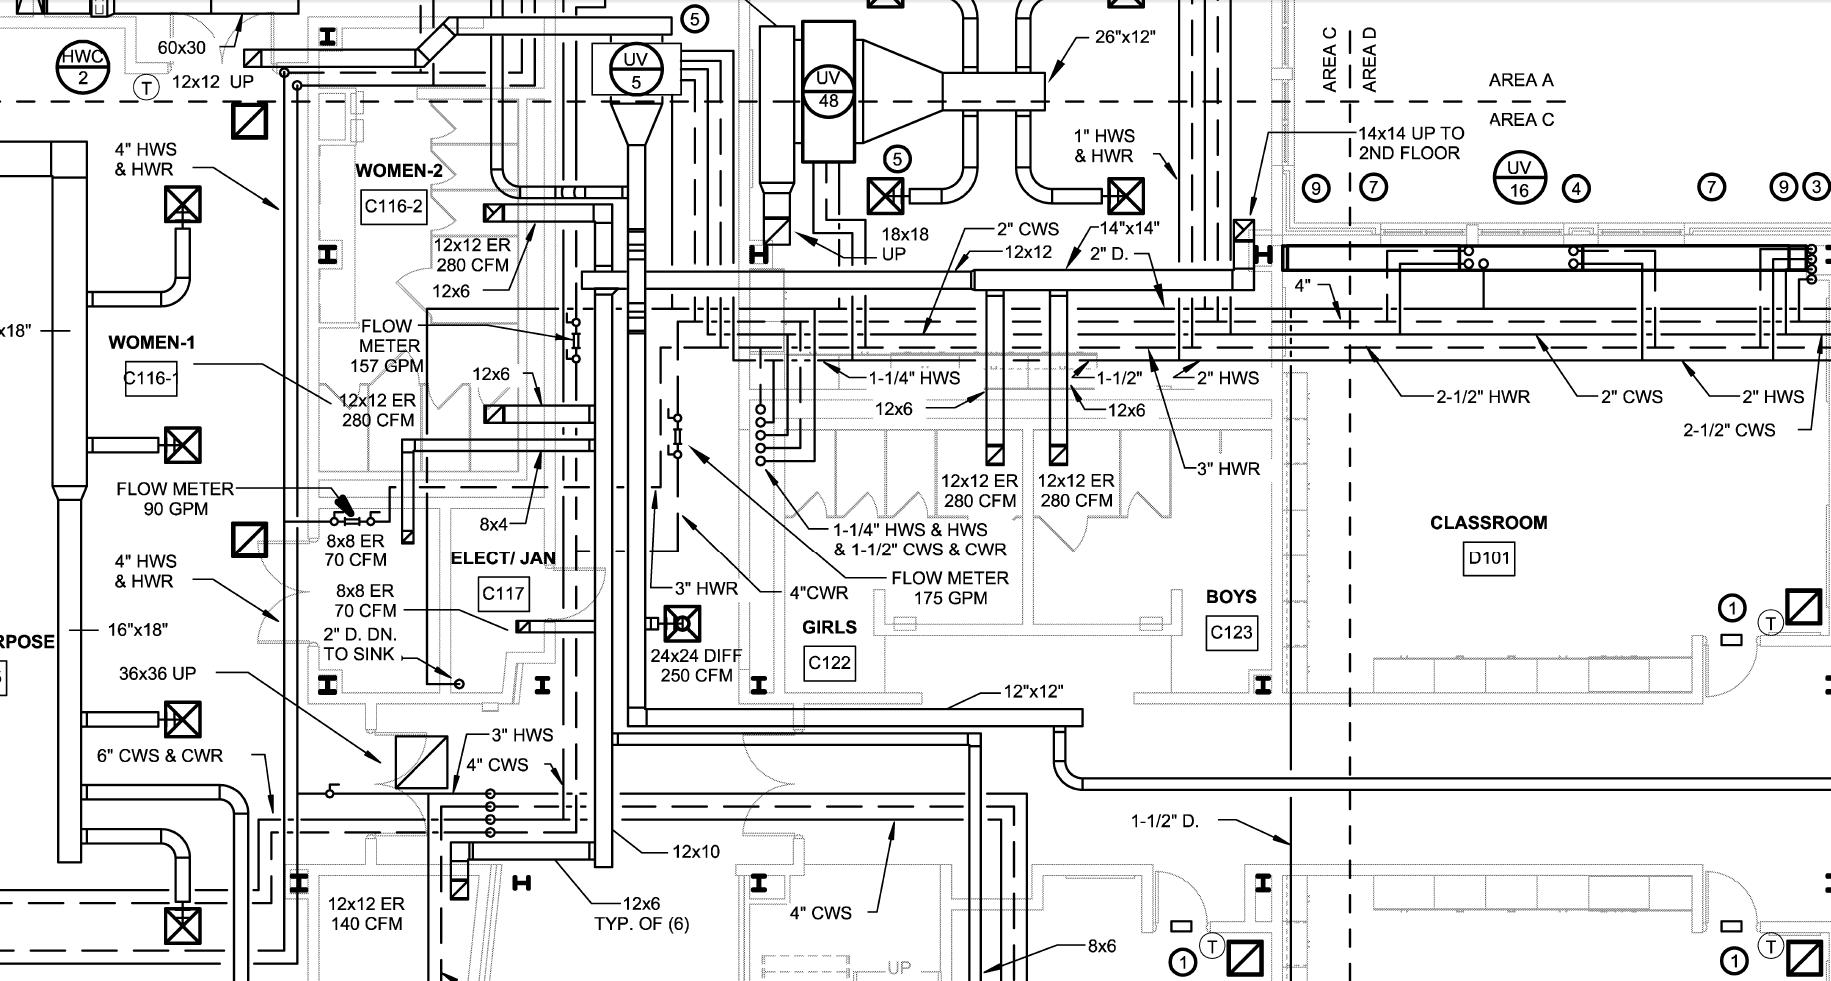 Cad, 3D & BIM Drafting Outsourcing Services MEP - Cad, 3D ... subaru legacy wiring diagrams free 